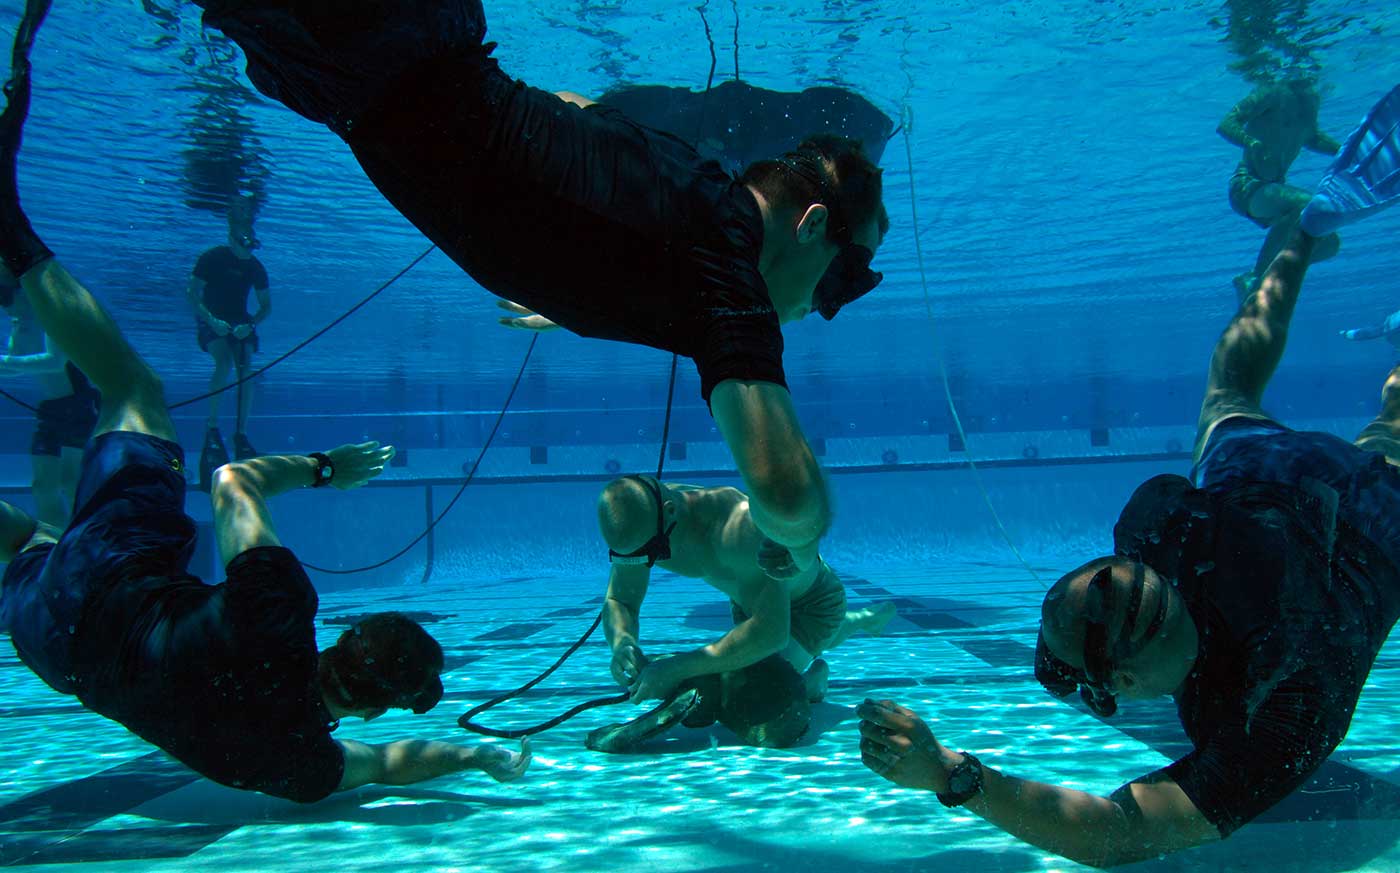 Instructors watch a tudent demonstrate knot-tying skills during water proficiency training.